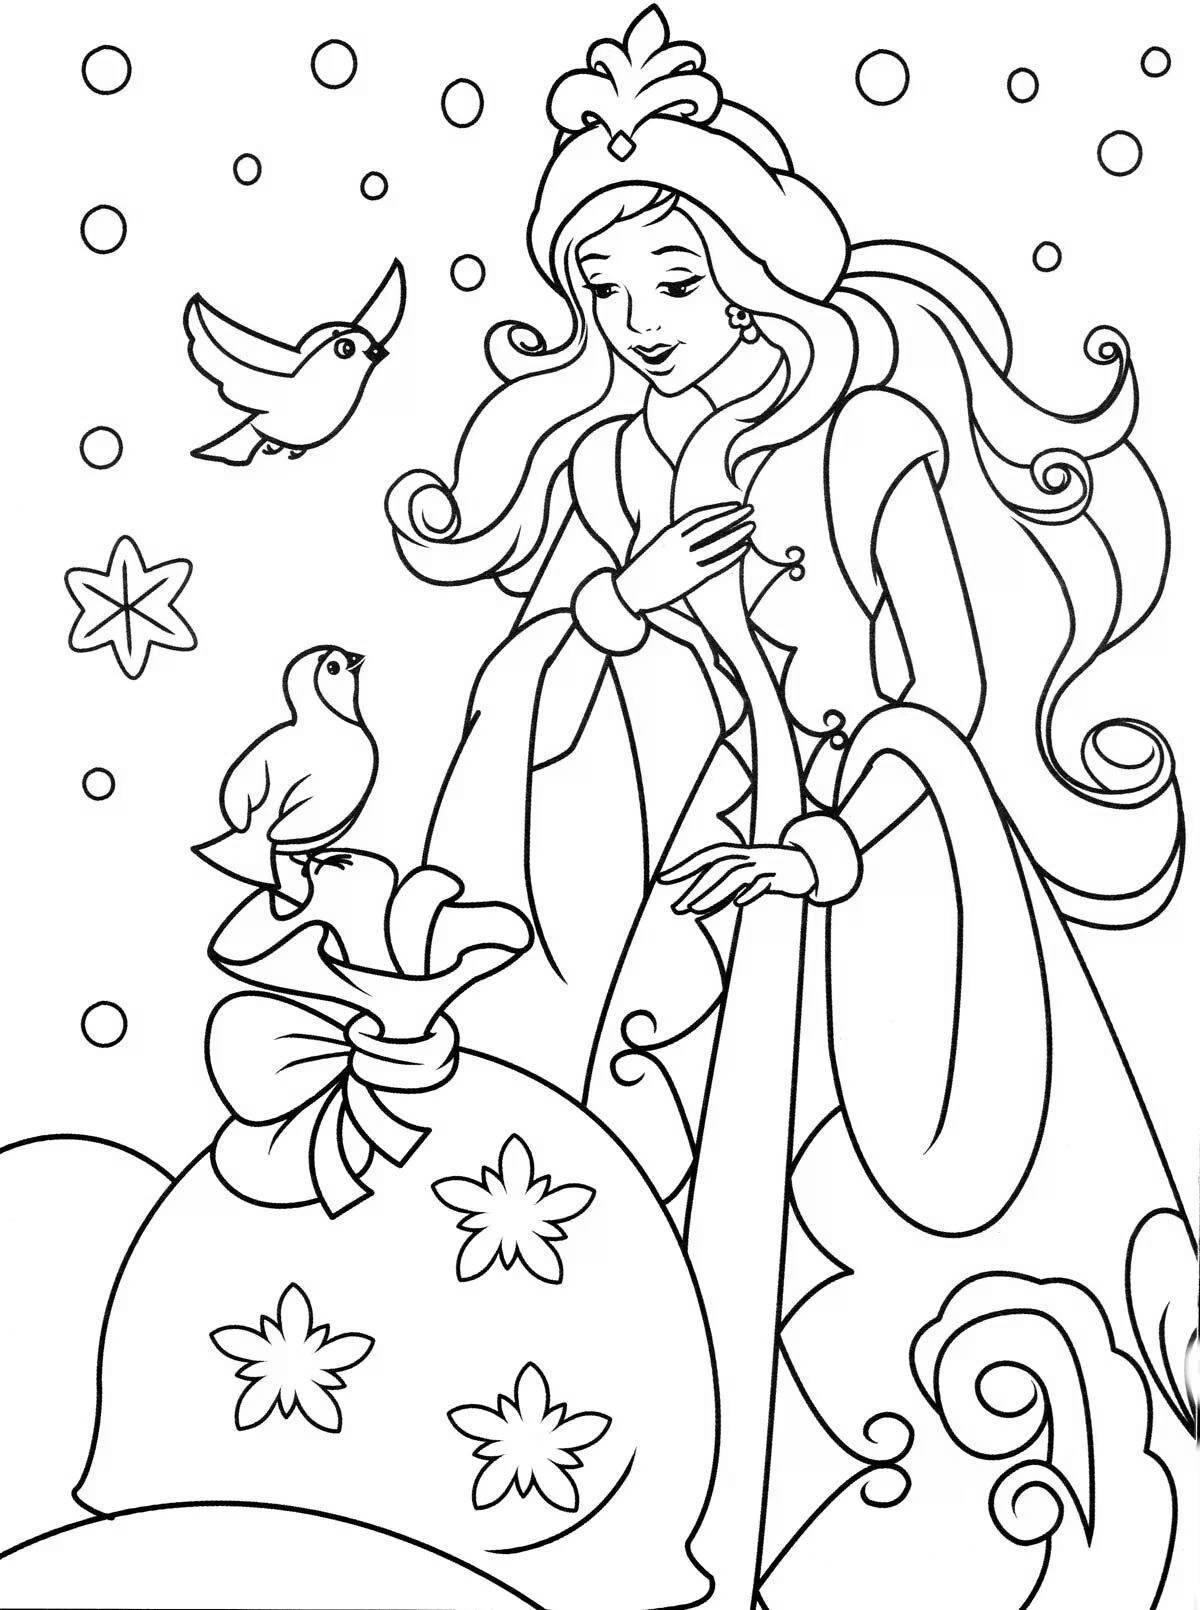 Glorious Christmas coloring book for girls 8 years old